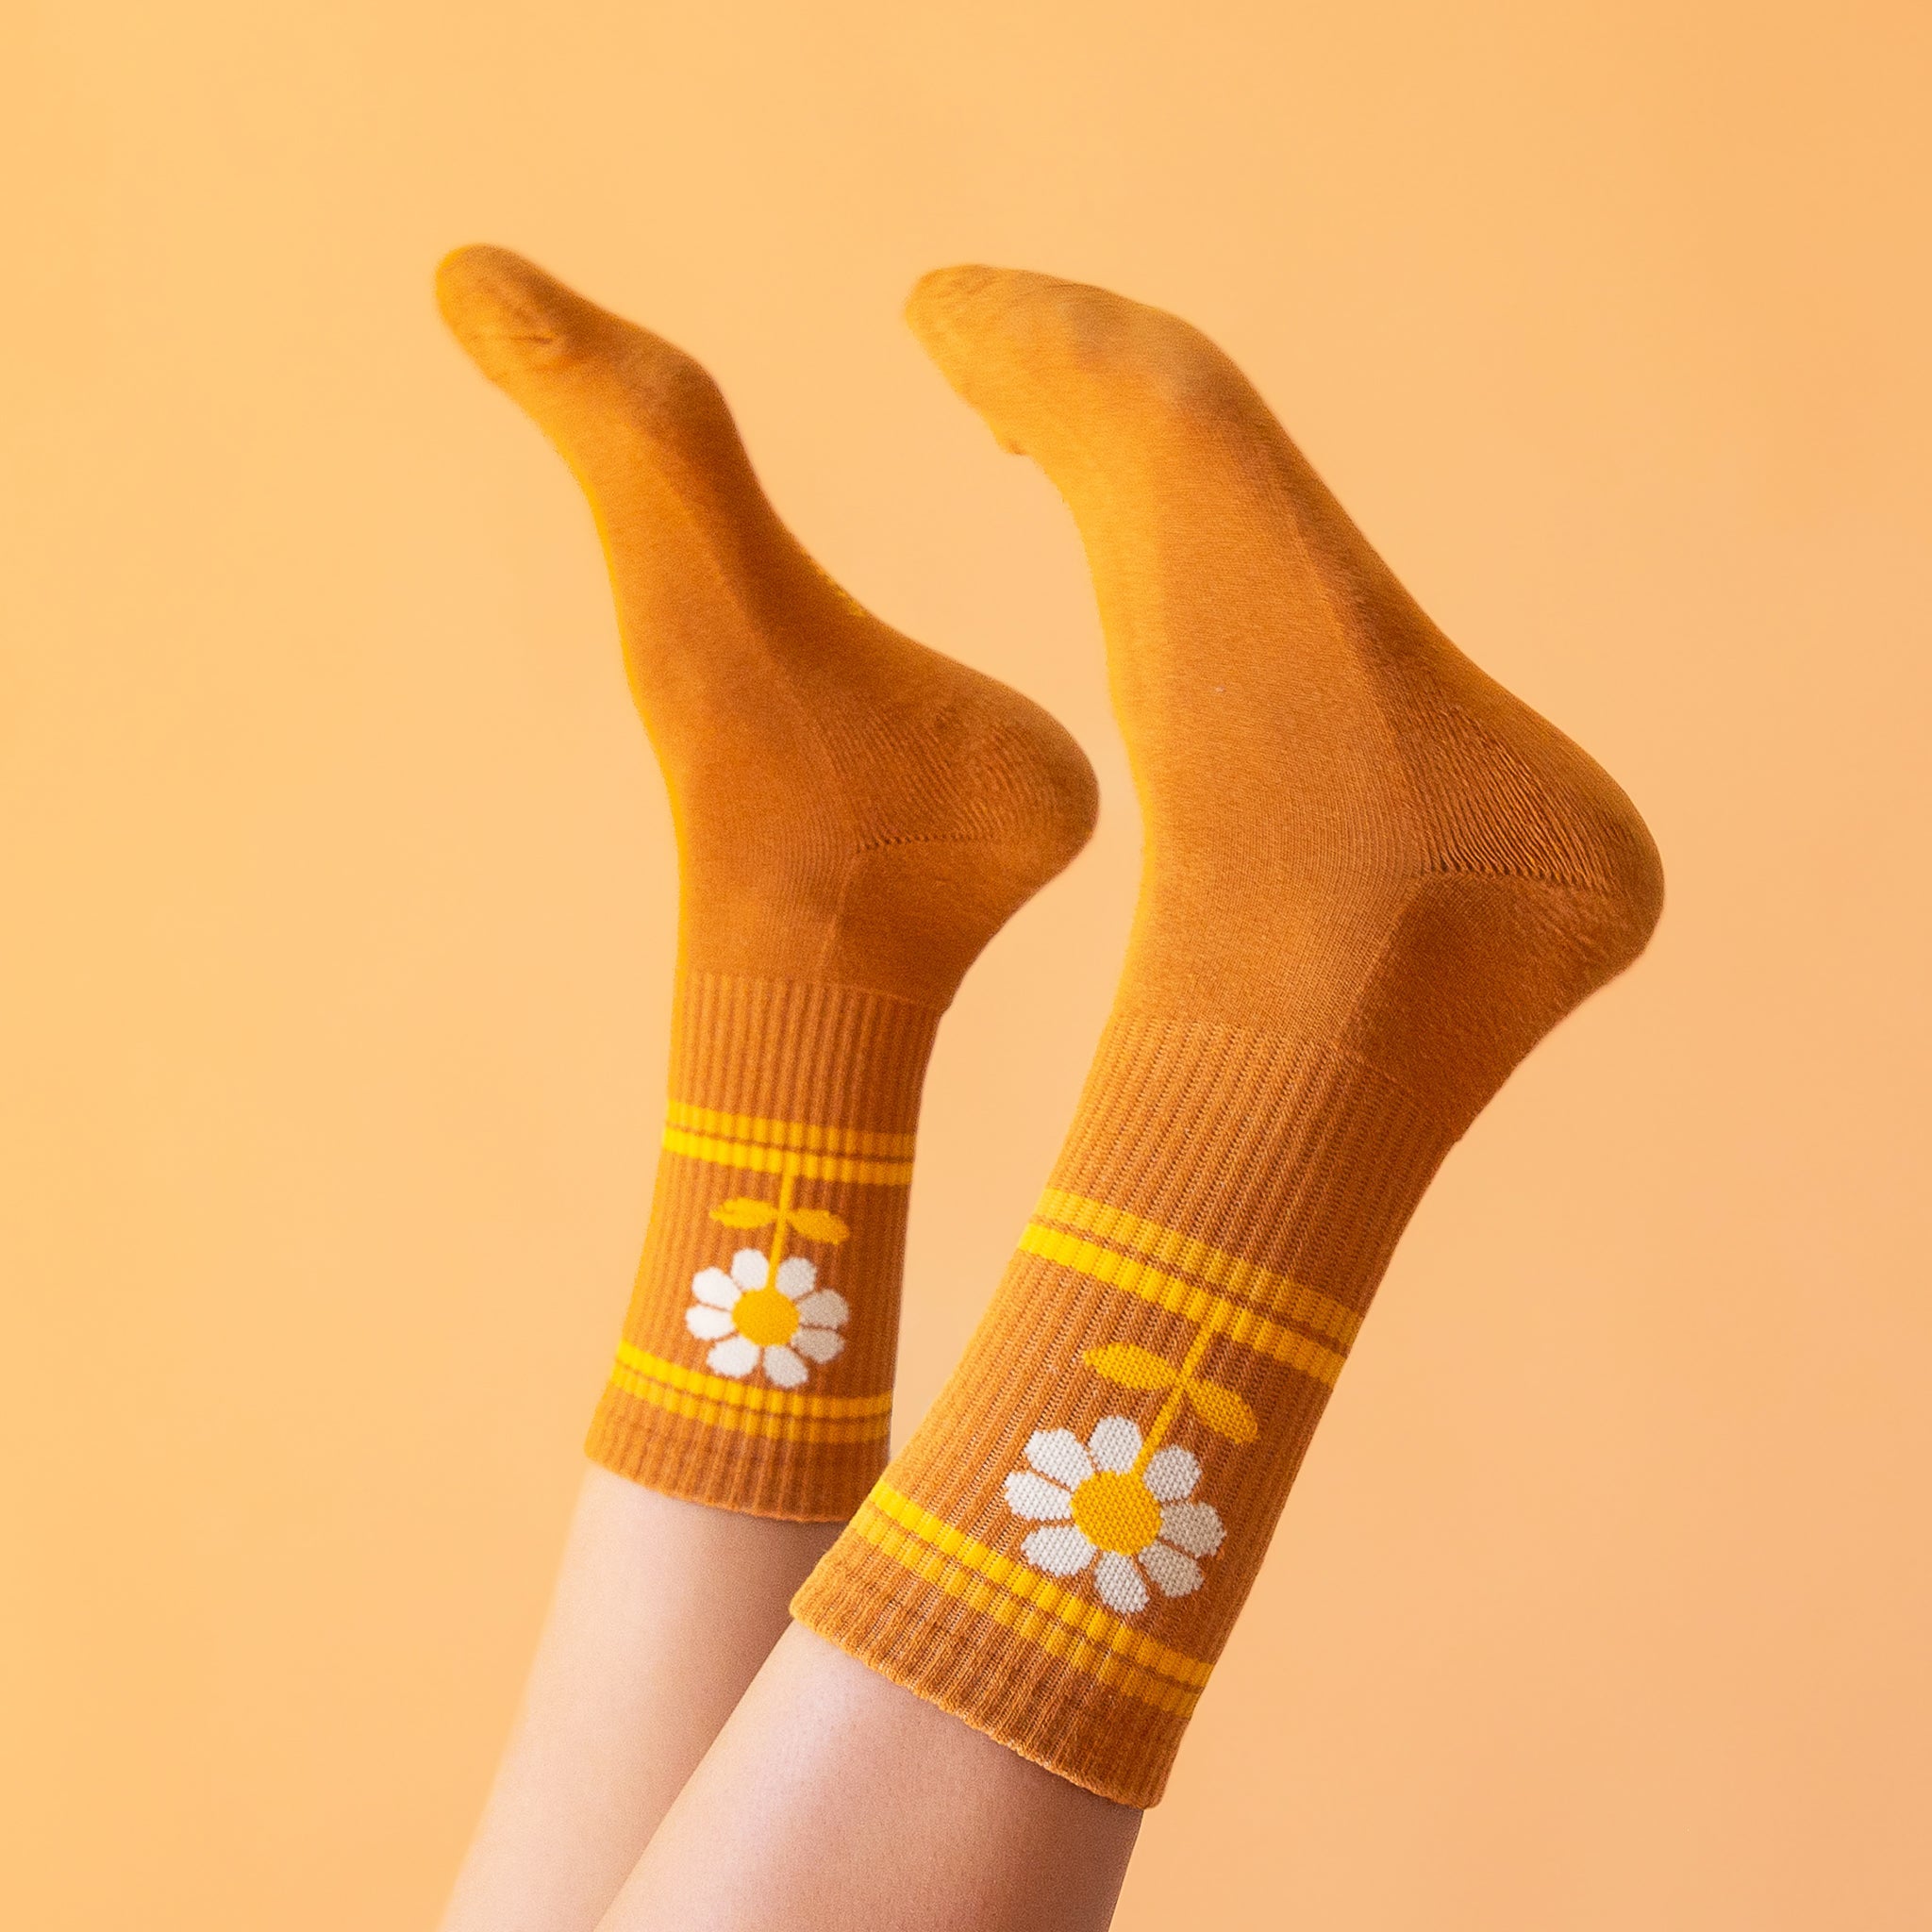 On a peachy background is a burnt orange pair of socks with a daisy graphic on the sides.